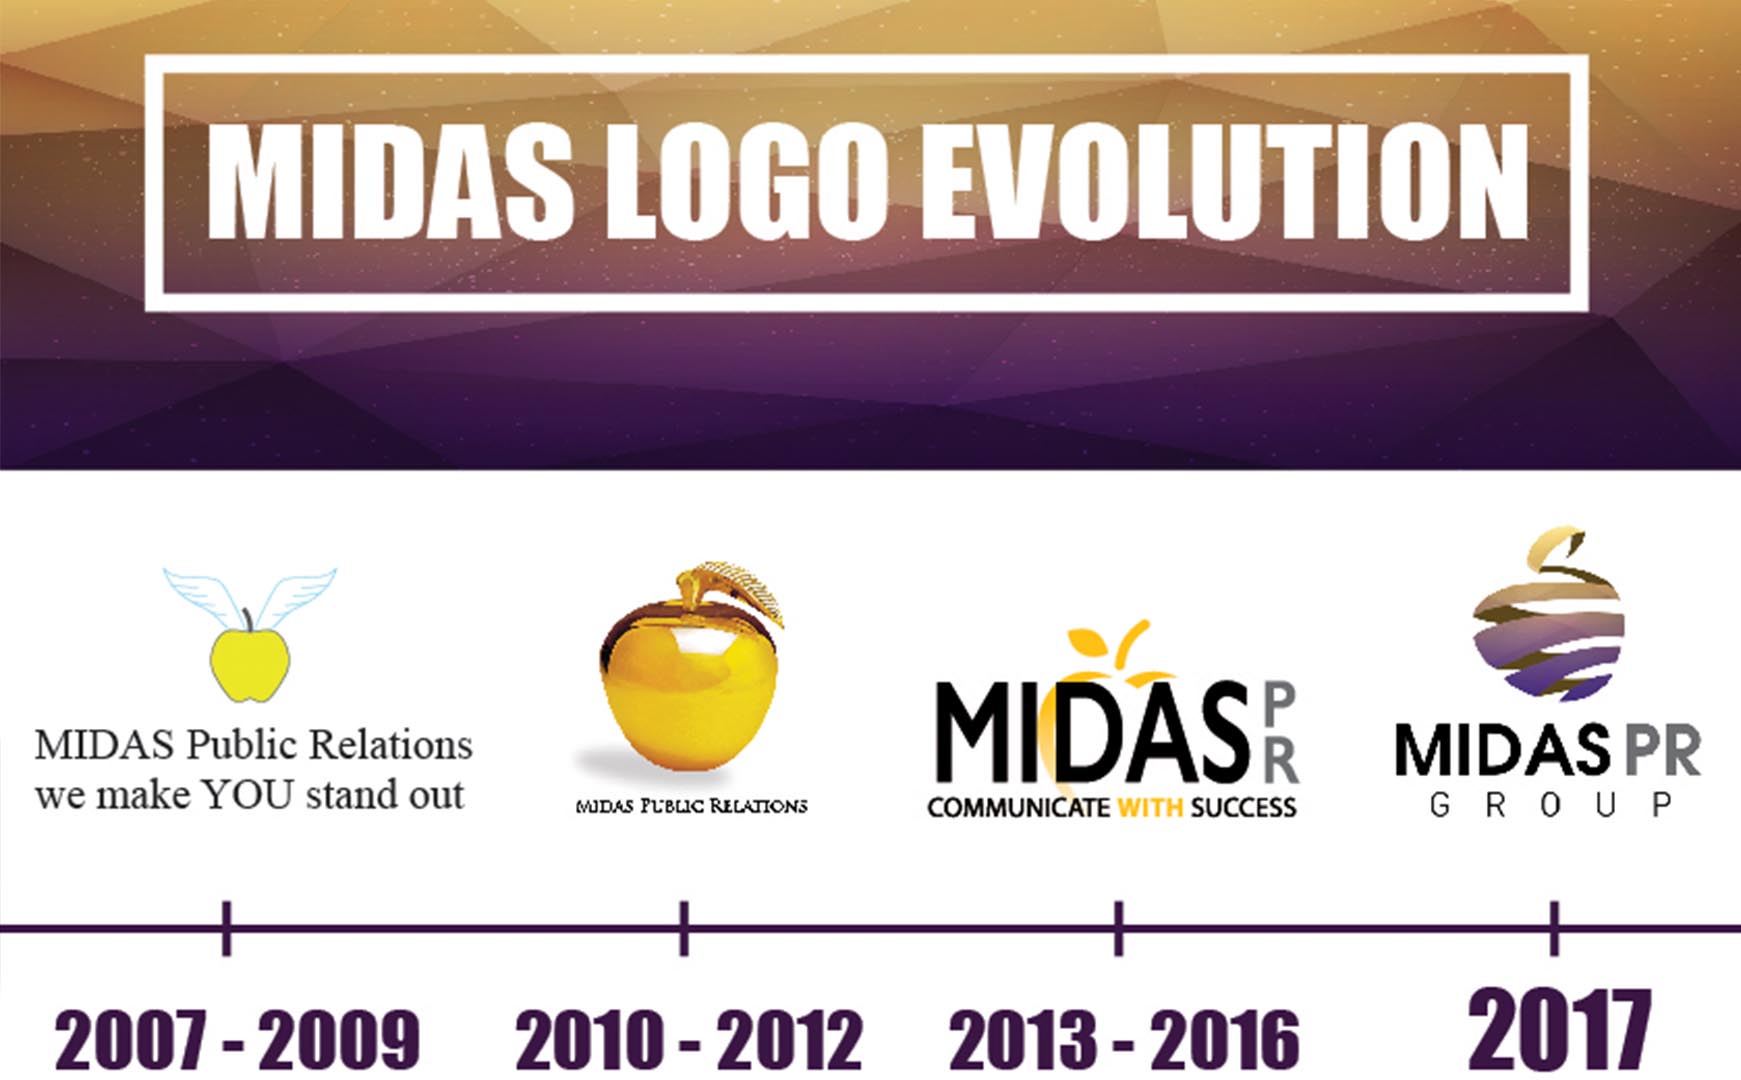 Our Own Rebranding Here at Midas PR Group